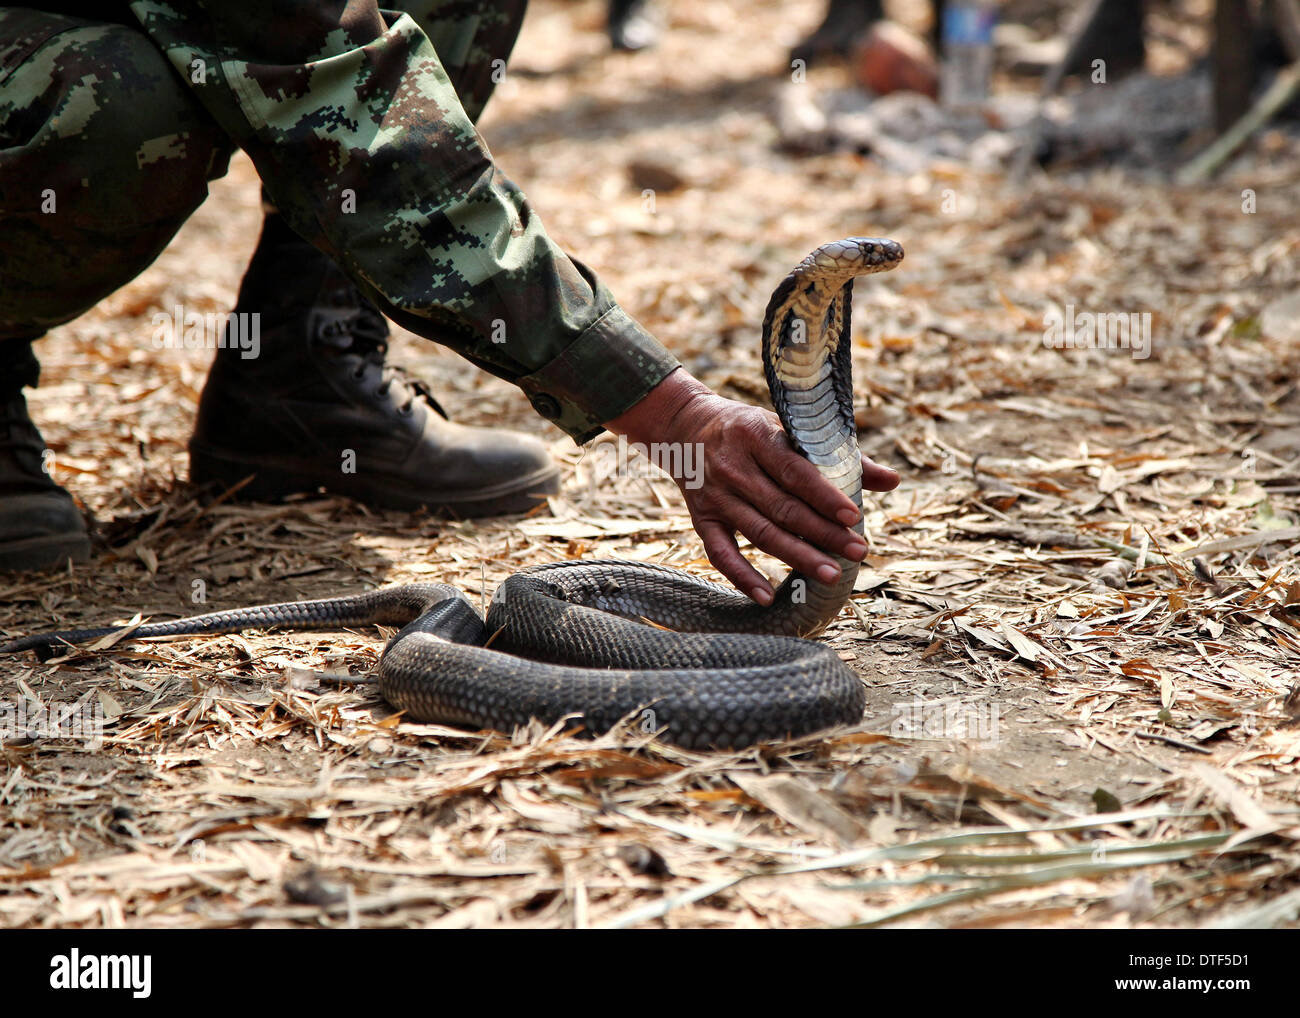 A Royal Thai Army Special Forces Instructor demonstrates the proper technique to safely pick up a King Cobra snake during Exercise Cobra Gold February 15, 2014 at Ban Dan Lan Hoi, Thailand,  2014. Stock Photo